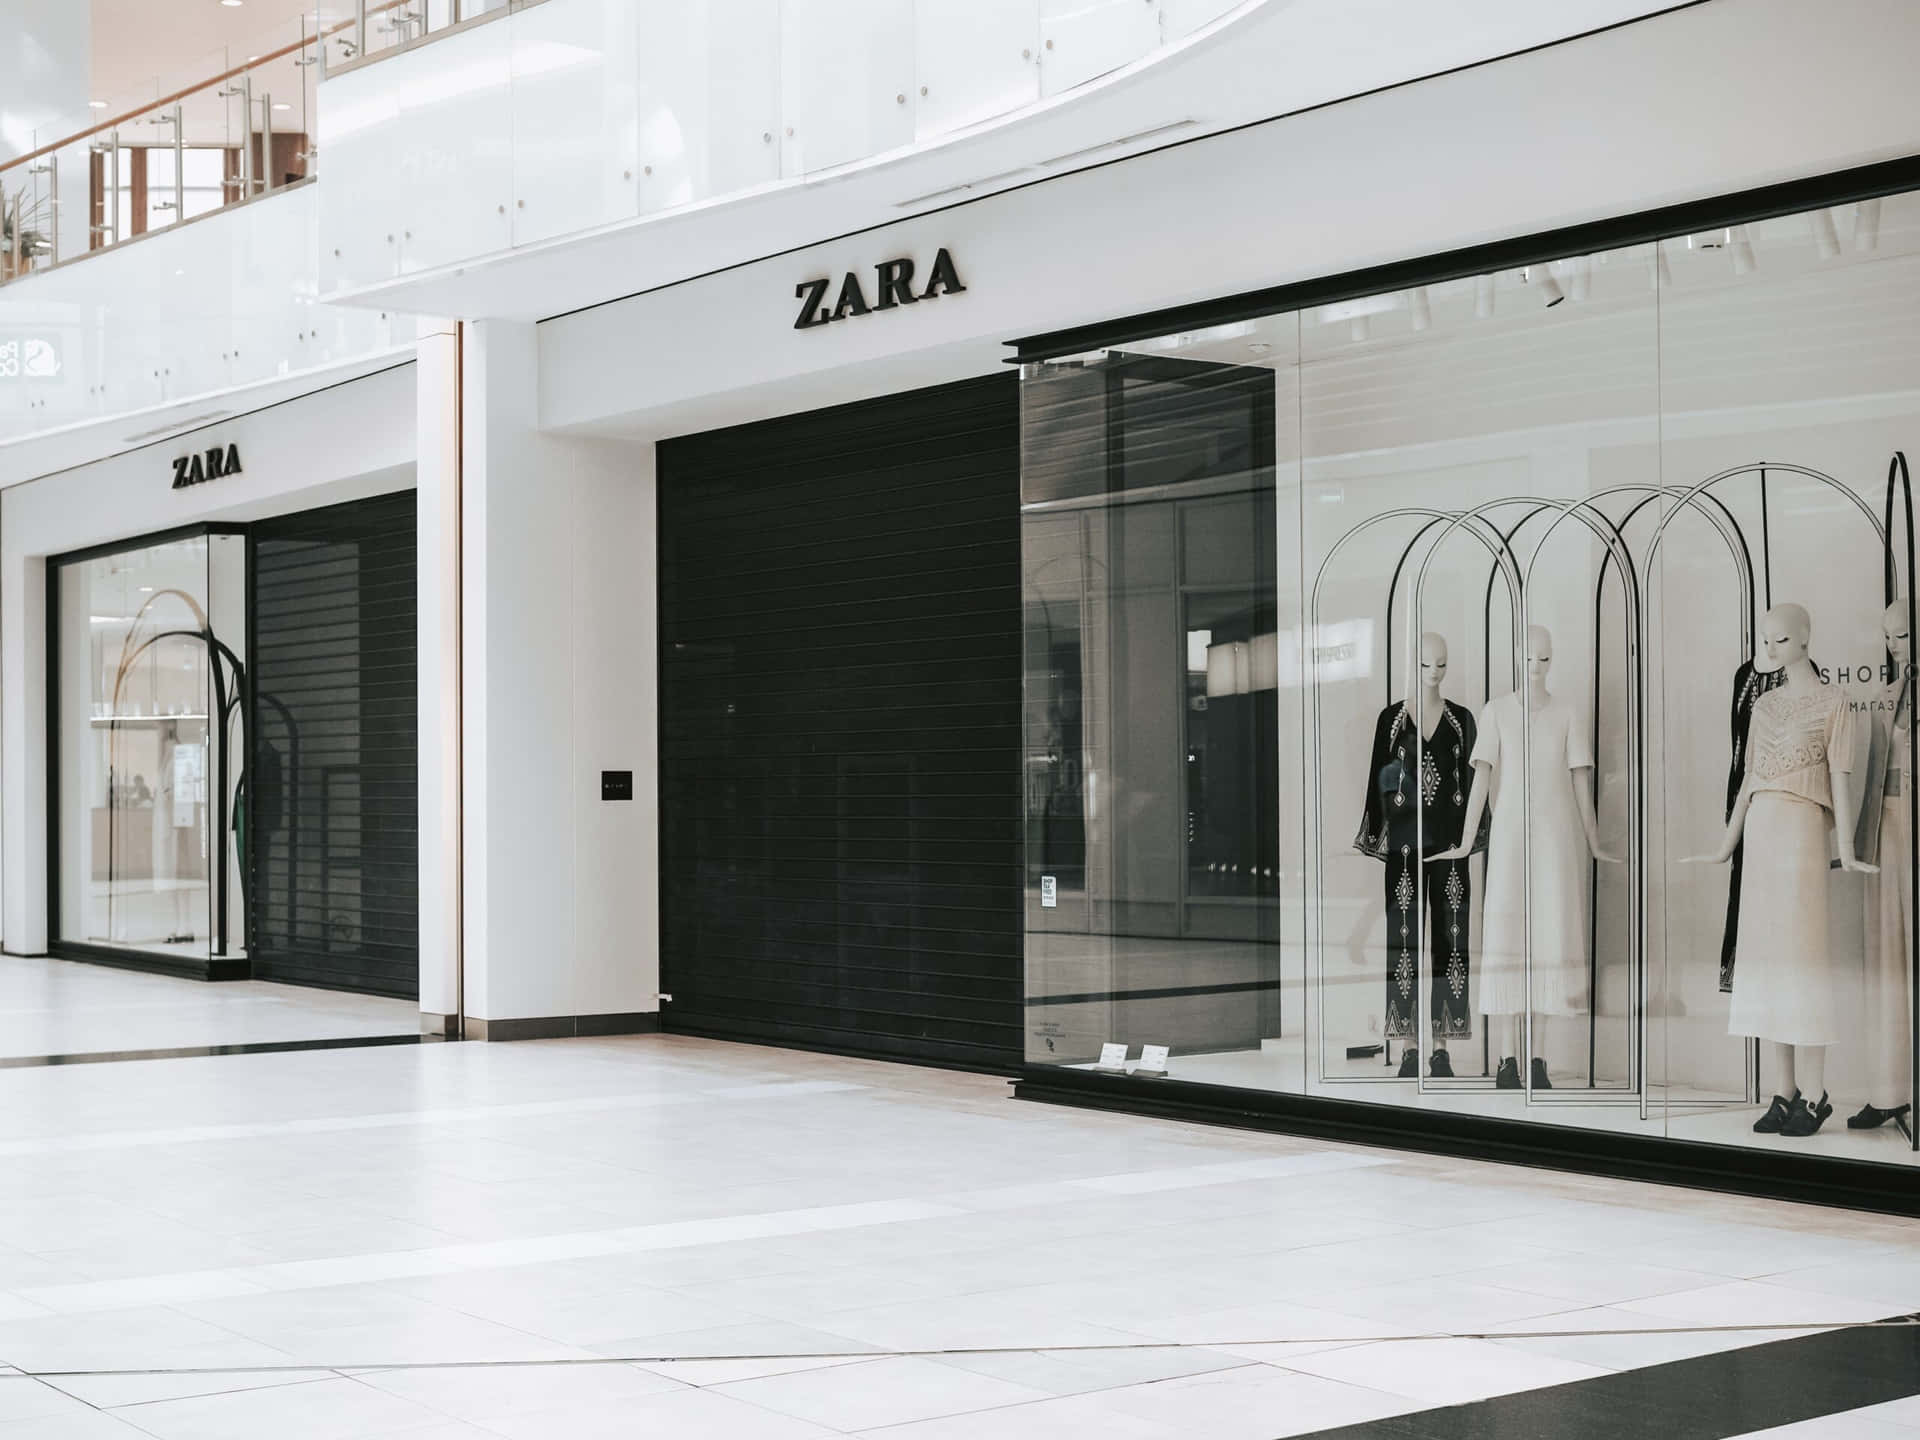 Image  Trendy clothes for any occasion at Zara.